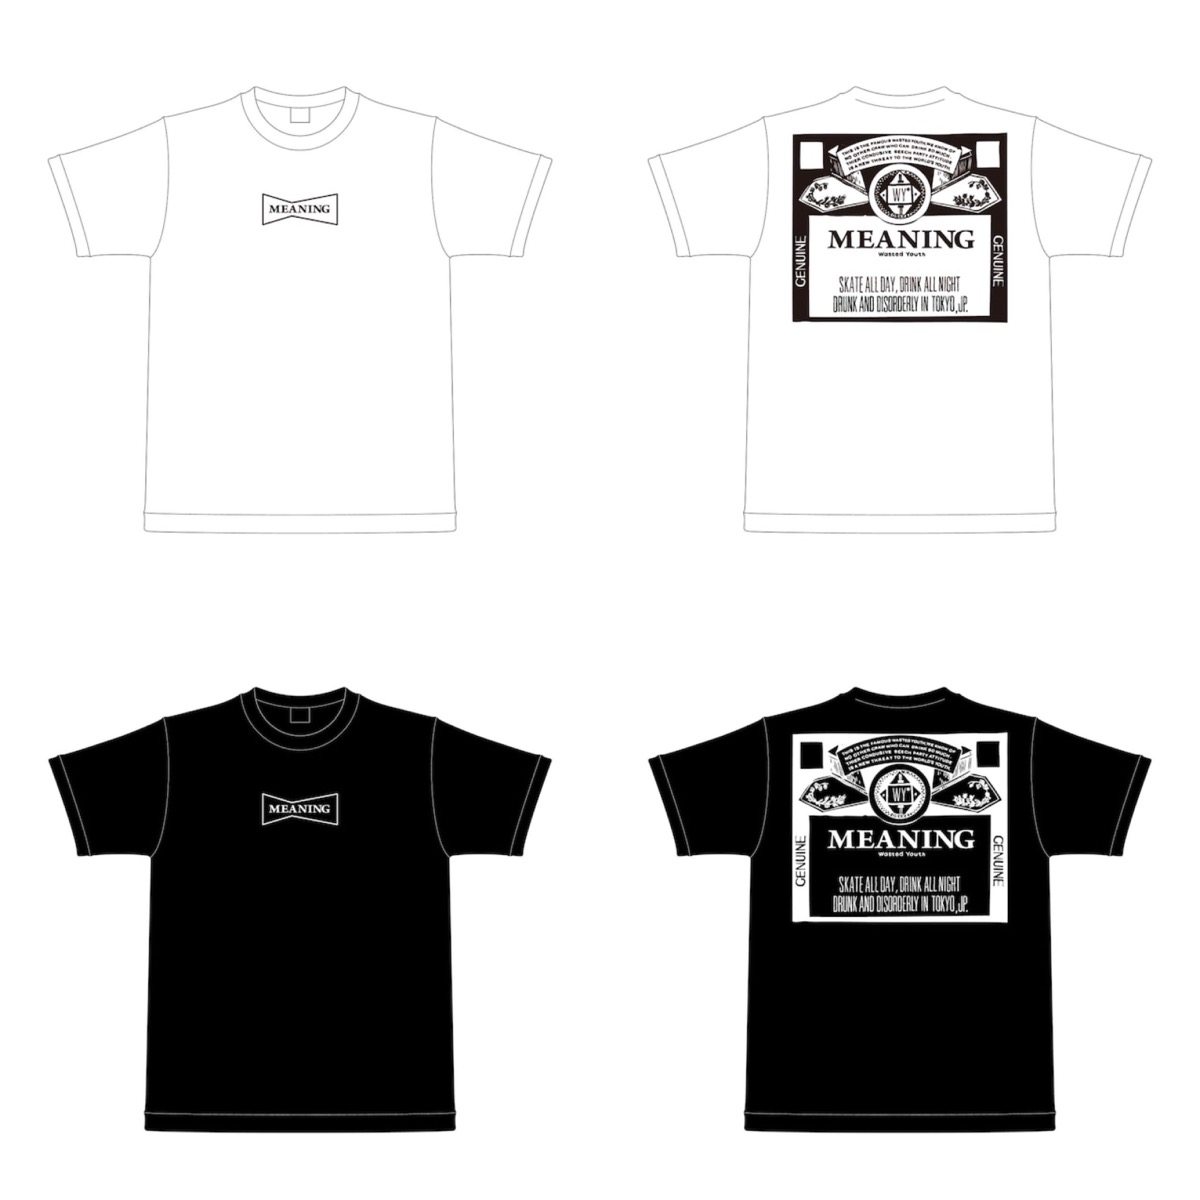 VERDY × MEANING 結成19周年記念Tシャツが国内7月7日に発売 | UP TO DATE